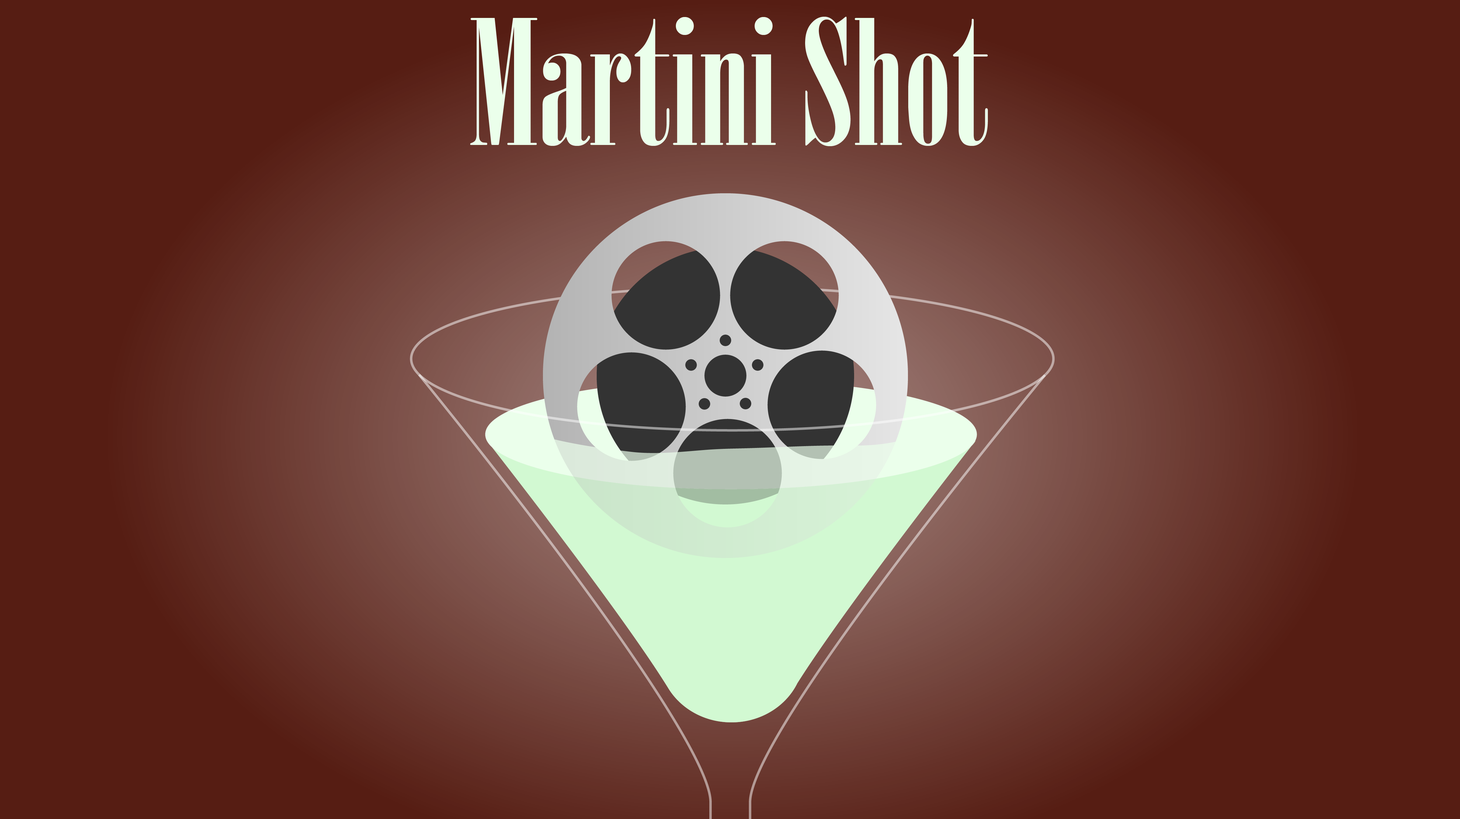 This is Rob Long, and on today’s Martini Shot, I talk about a complicated moment from an old movie where they use a word that we don’t use much these days in a way that is actually kind of funny. Yeah, I think that’s vague enough.